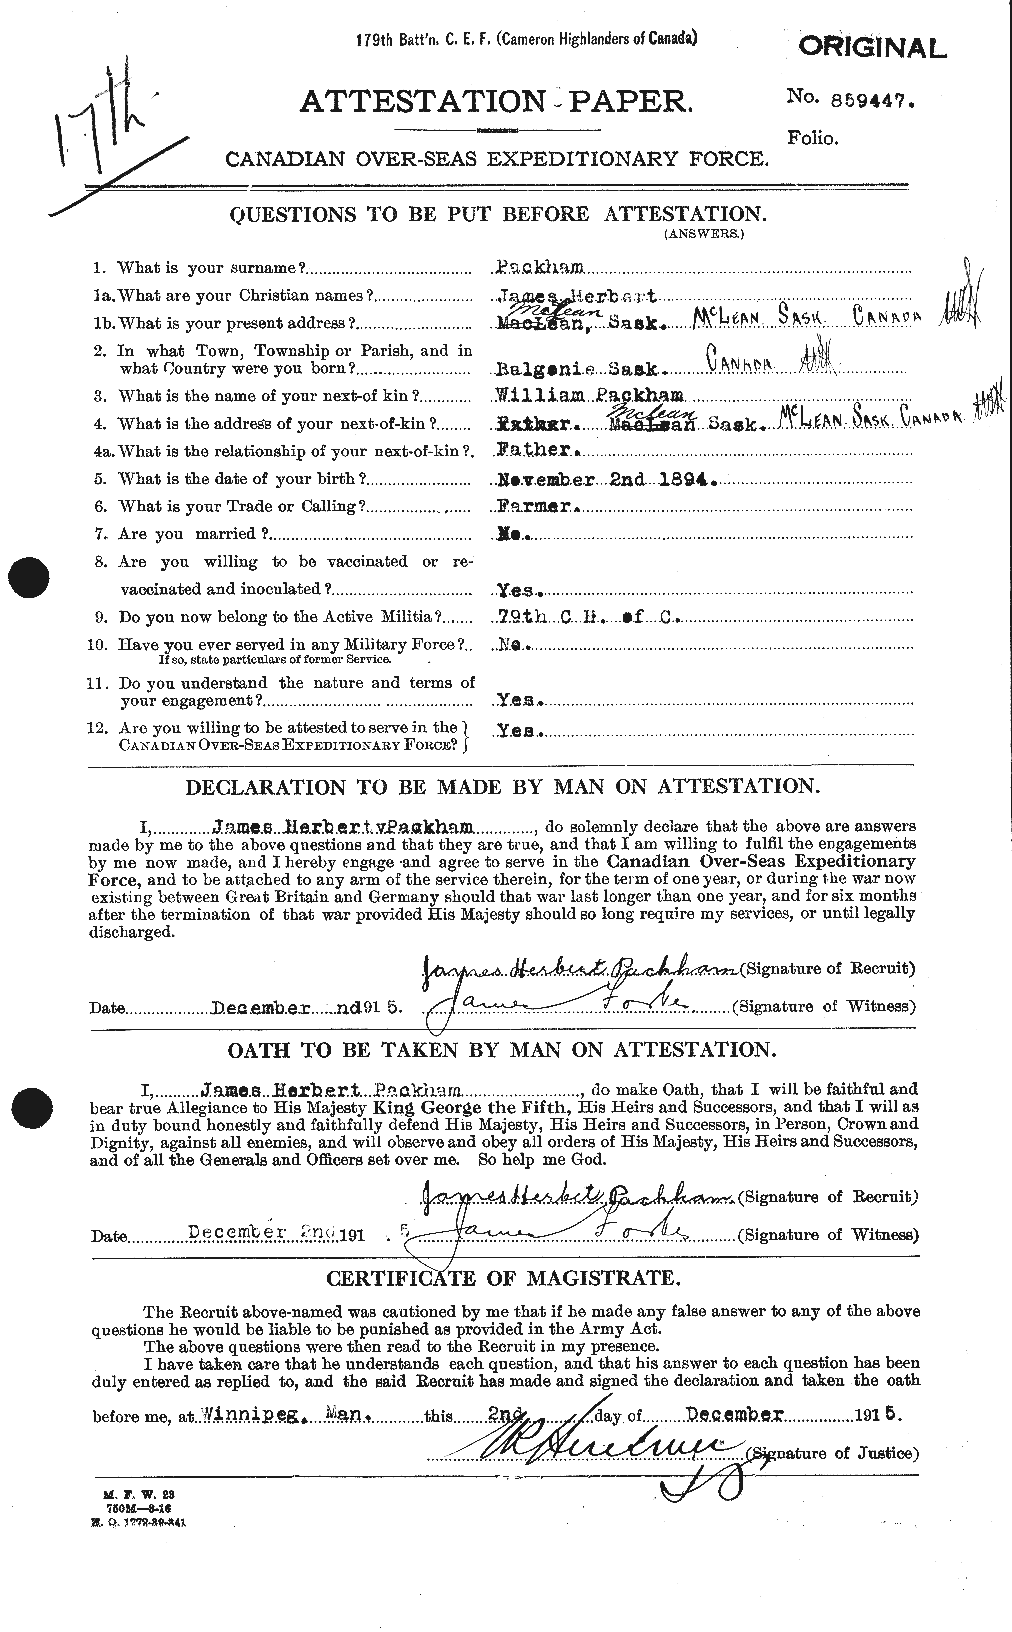 Personnel Records of the First World War - CEF 561823a